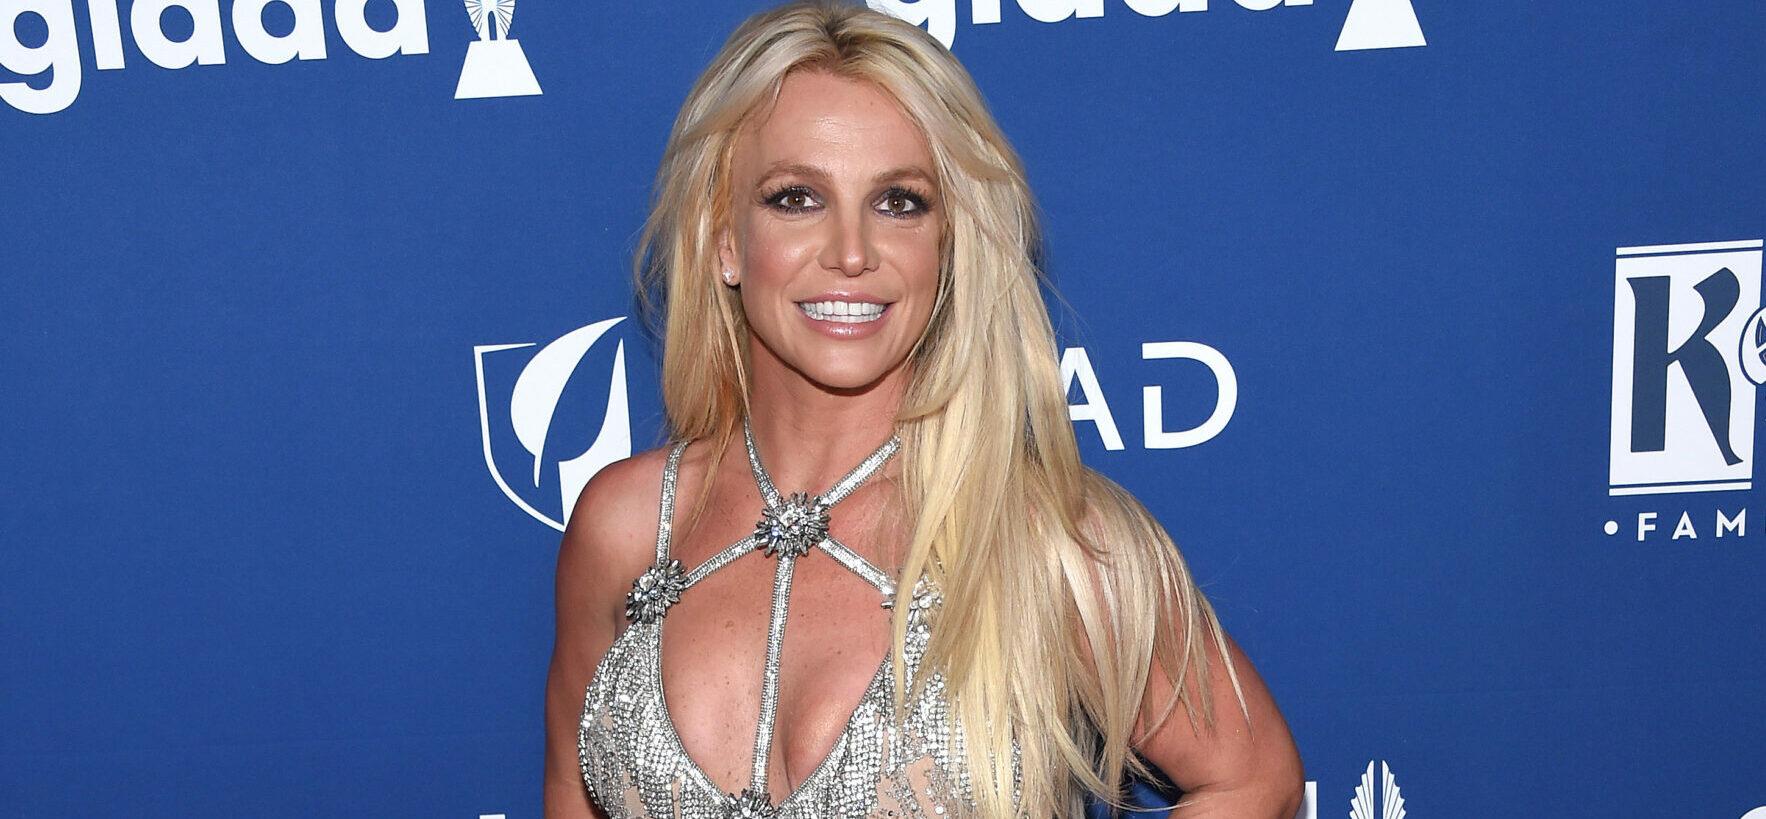 Britney Spears Shows Off Her Body On Day 1 Of Controversial Water Fast